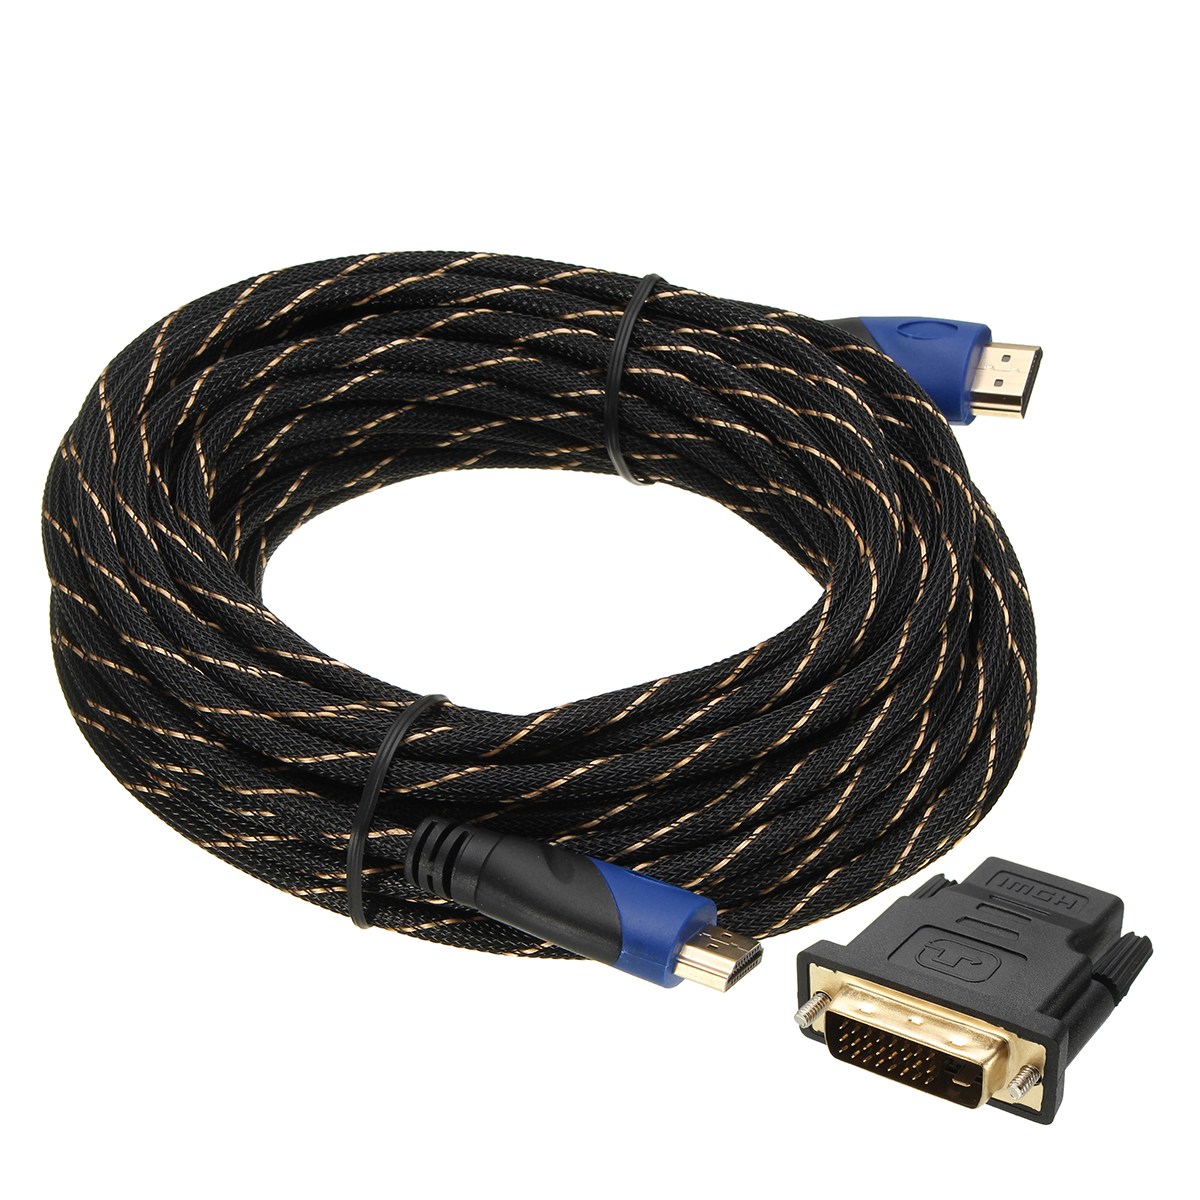 Braided HD Cable V1.4 1080P HD 3D for PS3 Xbox HDTV with DVI Connector 30